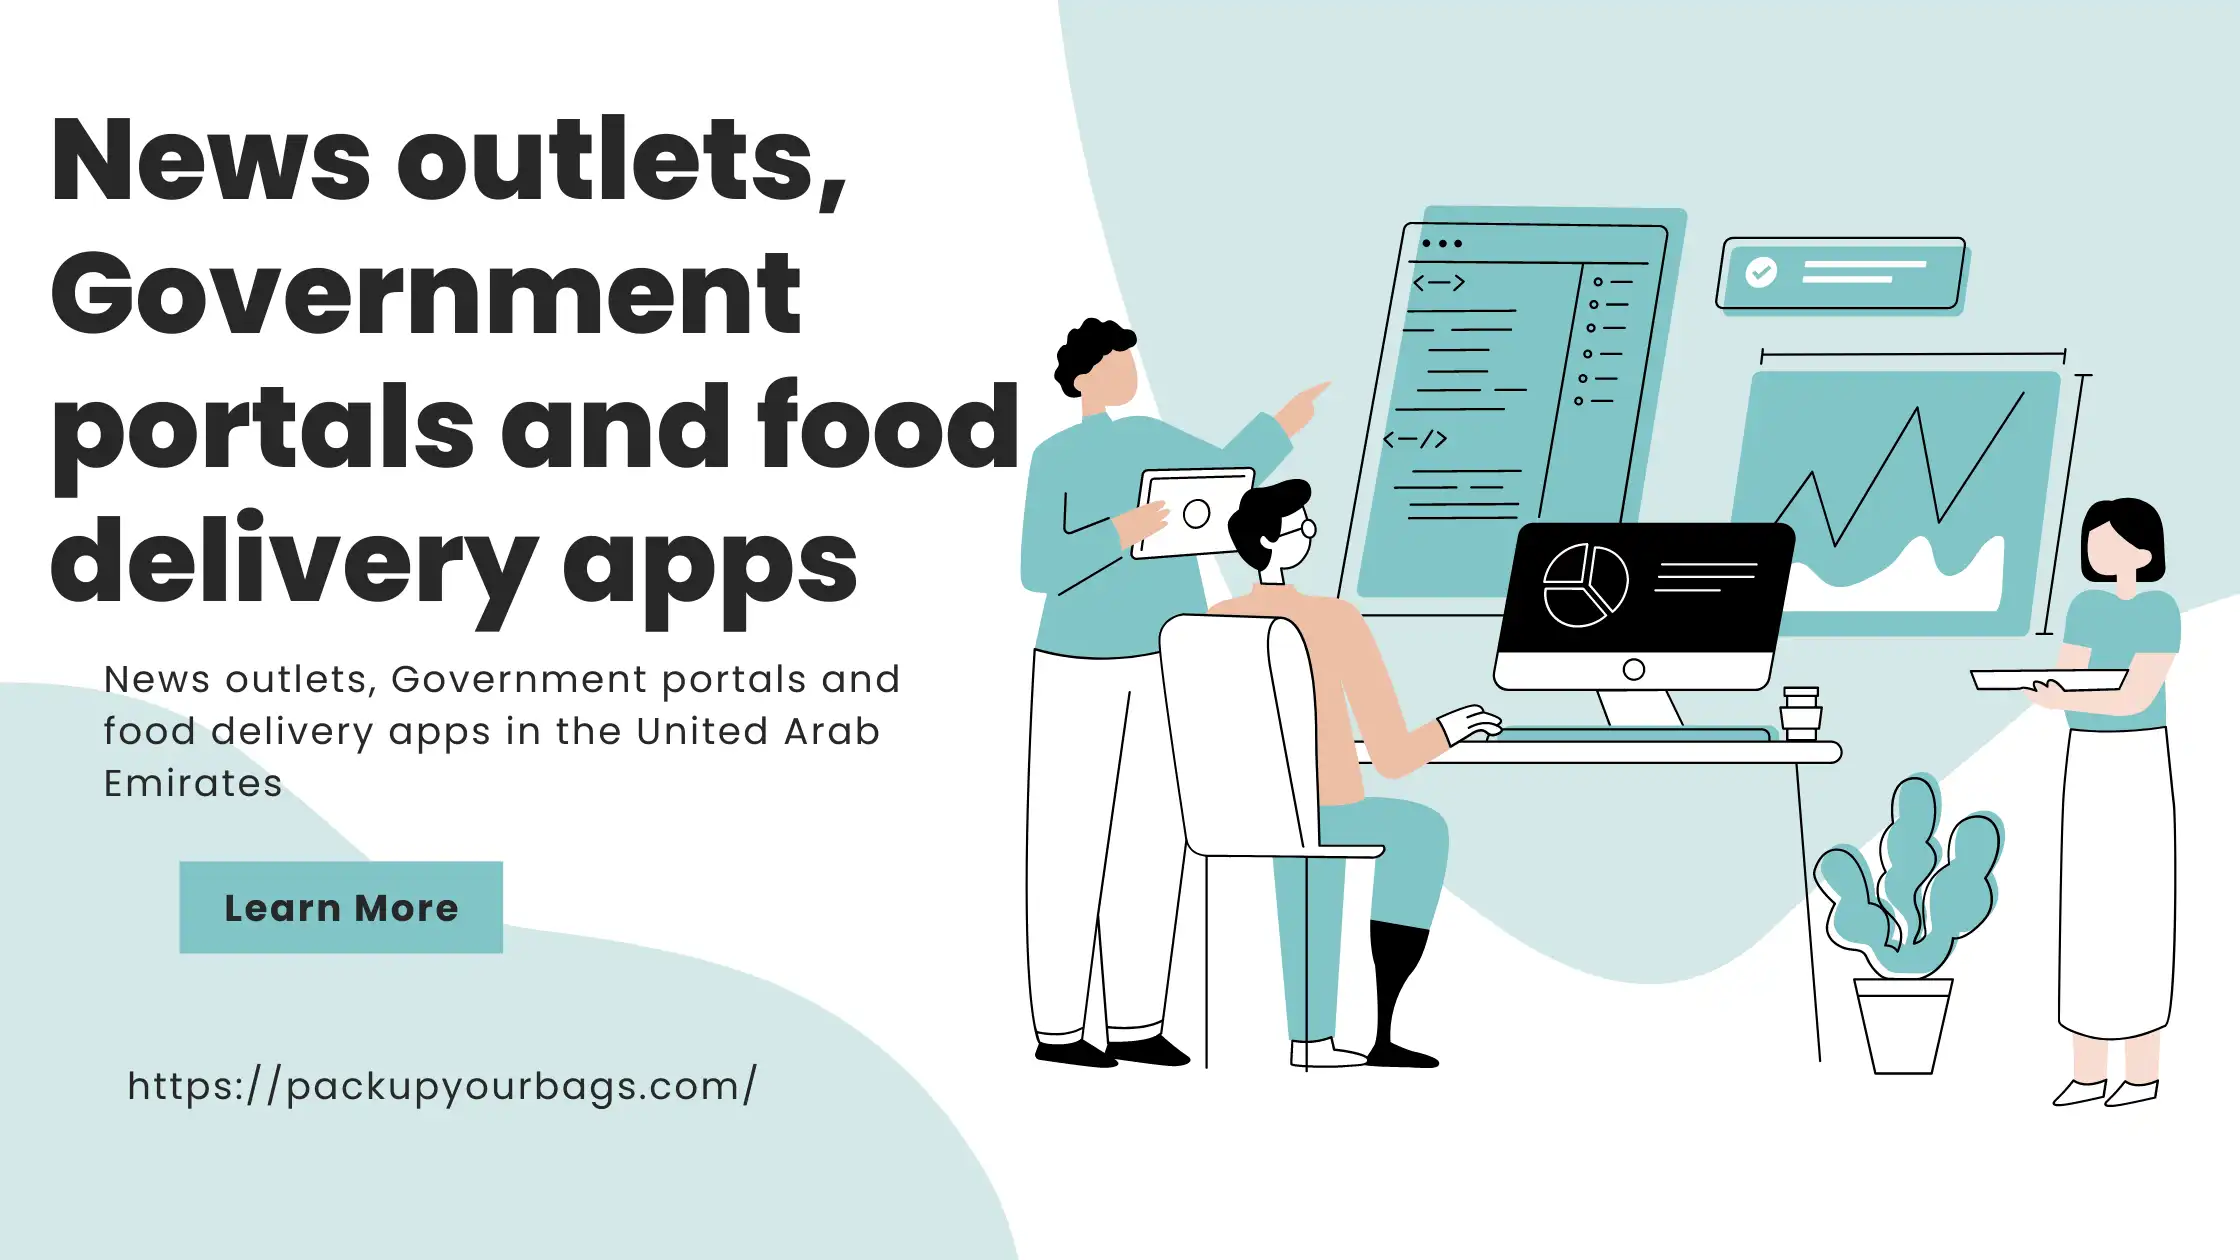 News outlets, Government portals and food delivery apps